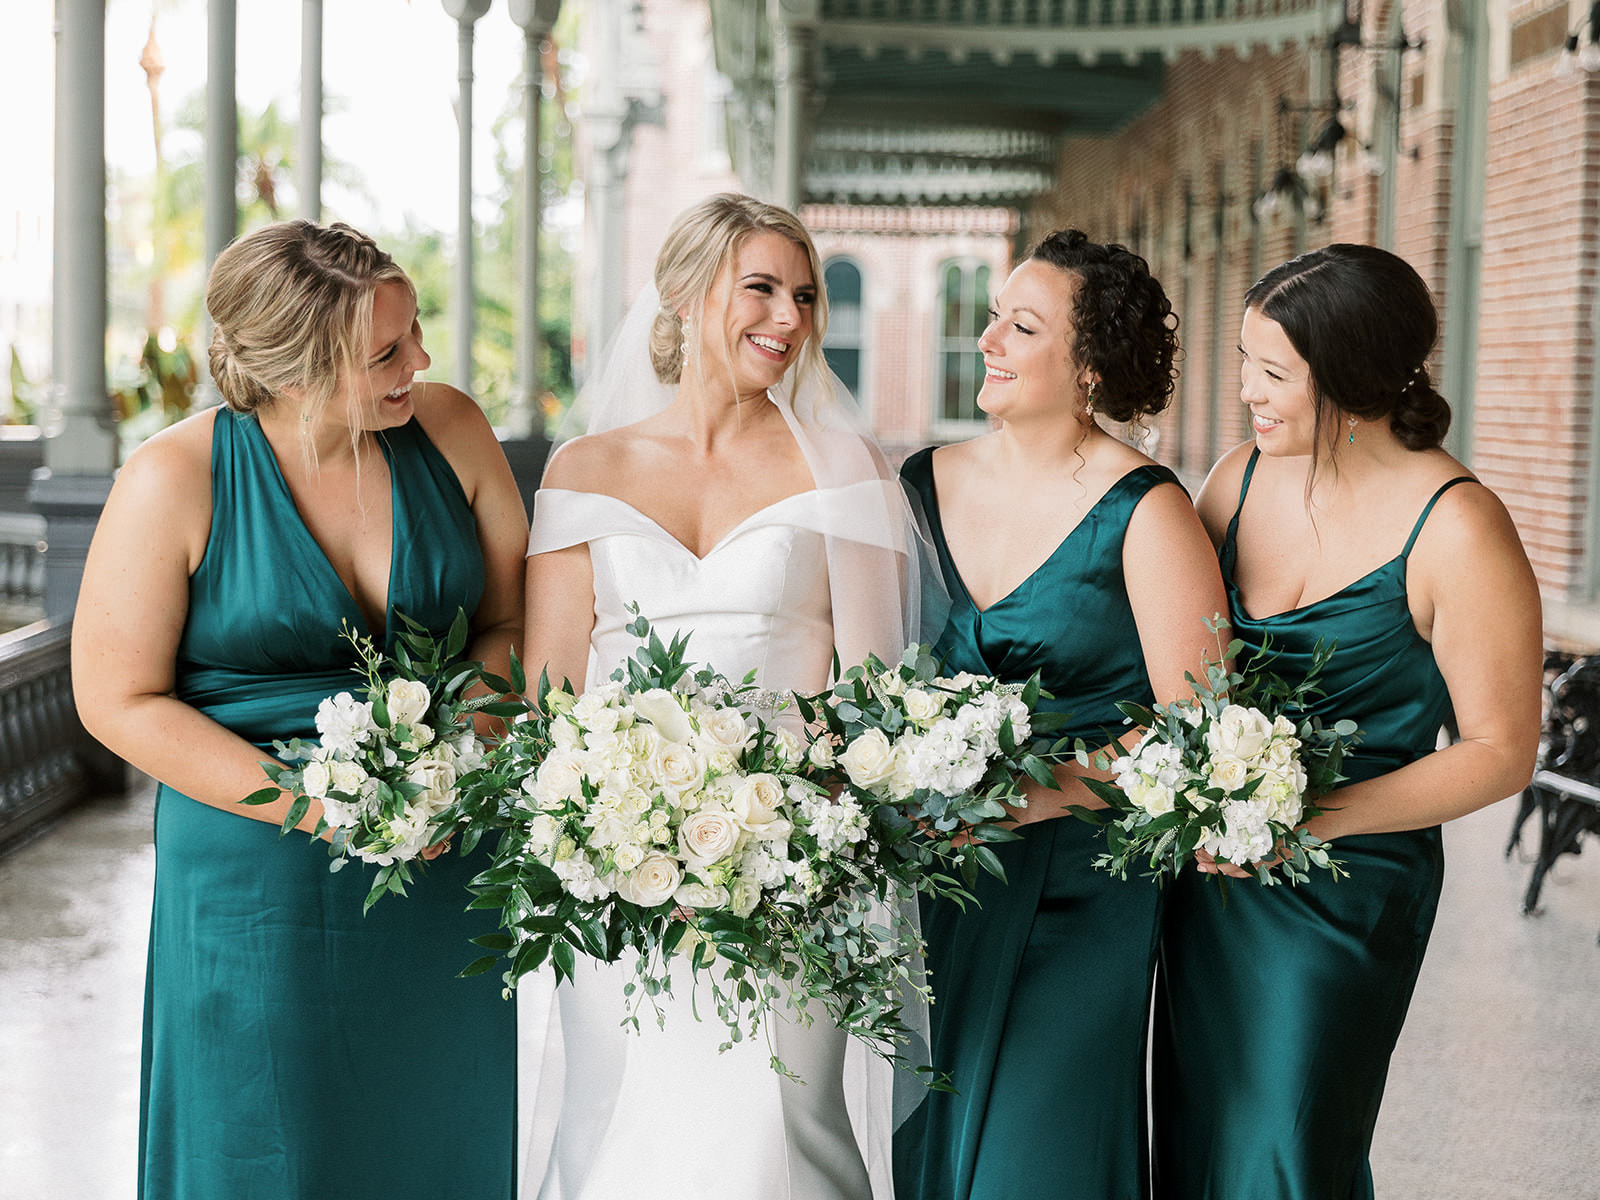 White Rose and Ruscus Greenery Bridal Bouquet | Elegant White Ivory Satin Off the Shoulder Fit and Flare Maggie Sottero Wedding Dress | Mismatched Emerald Green Satin Bridesmaid Dress Ideas | Tampa Bay Henry B. Plant Museum Photo Inspiration